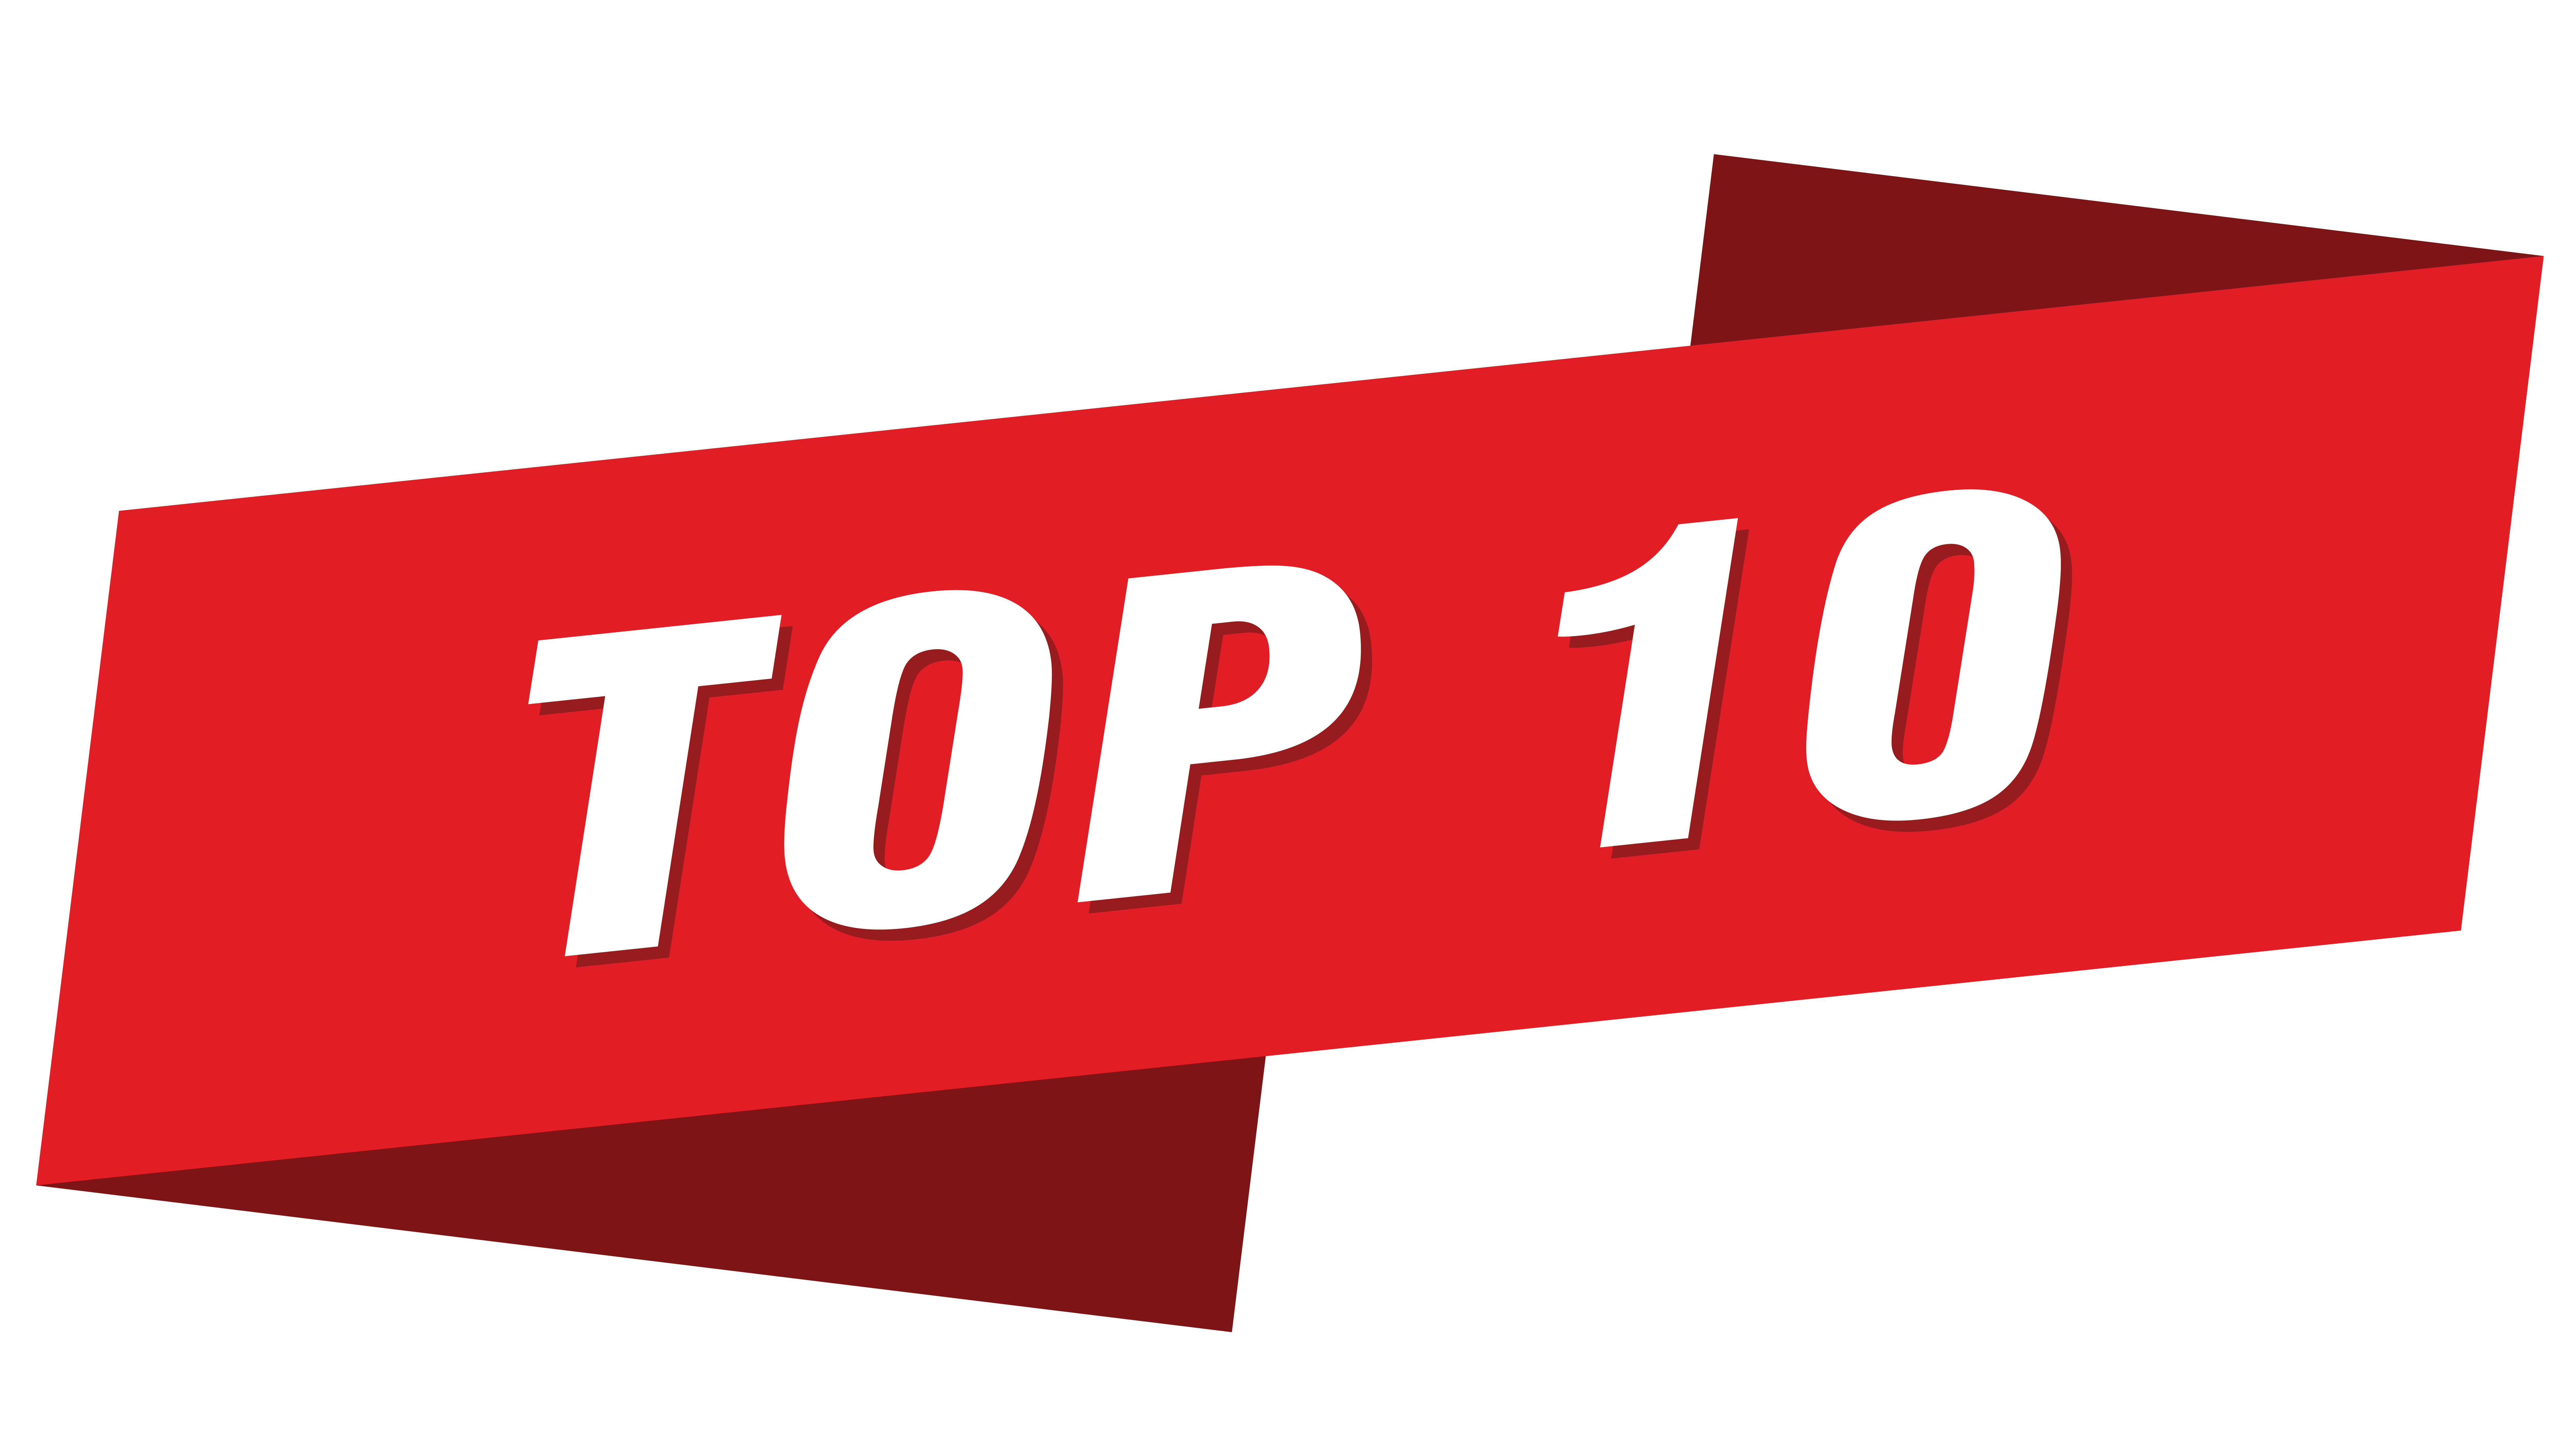 top 10 graphic red